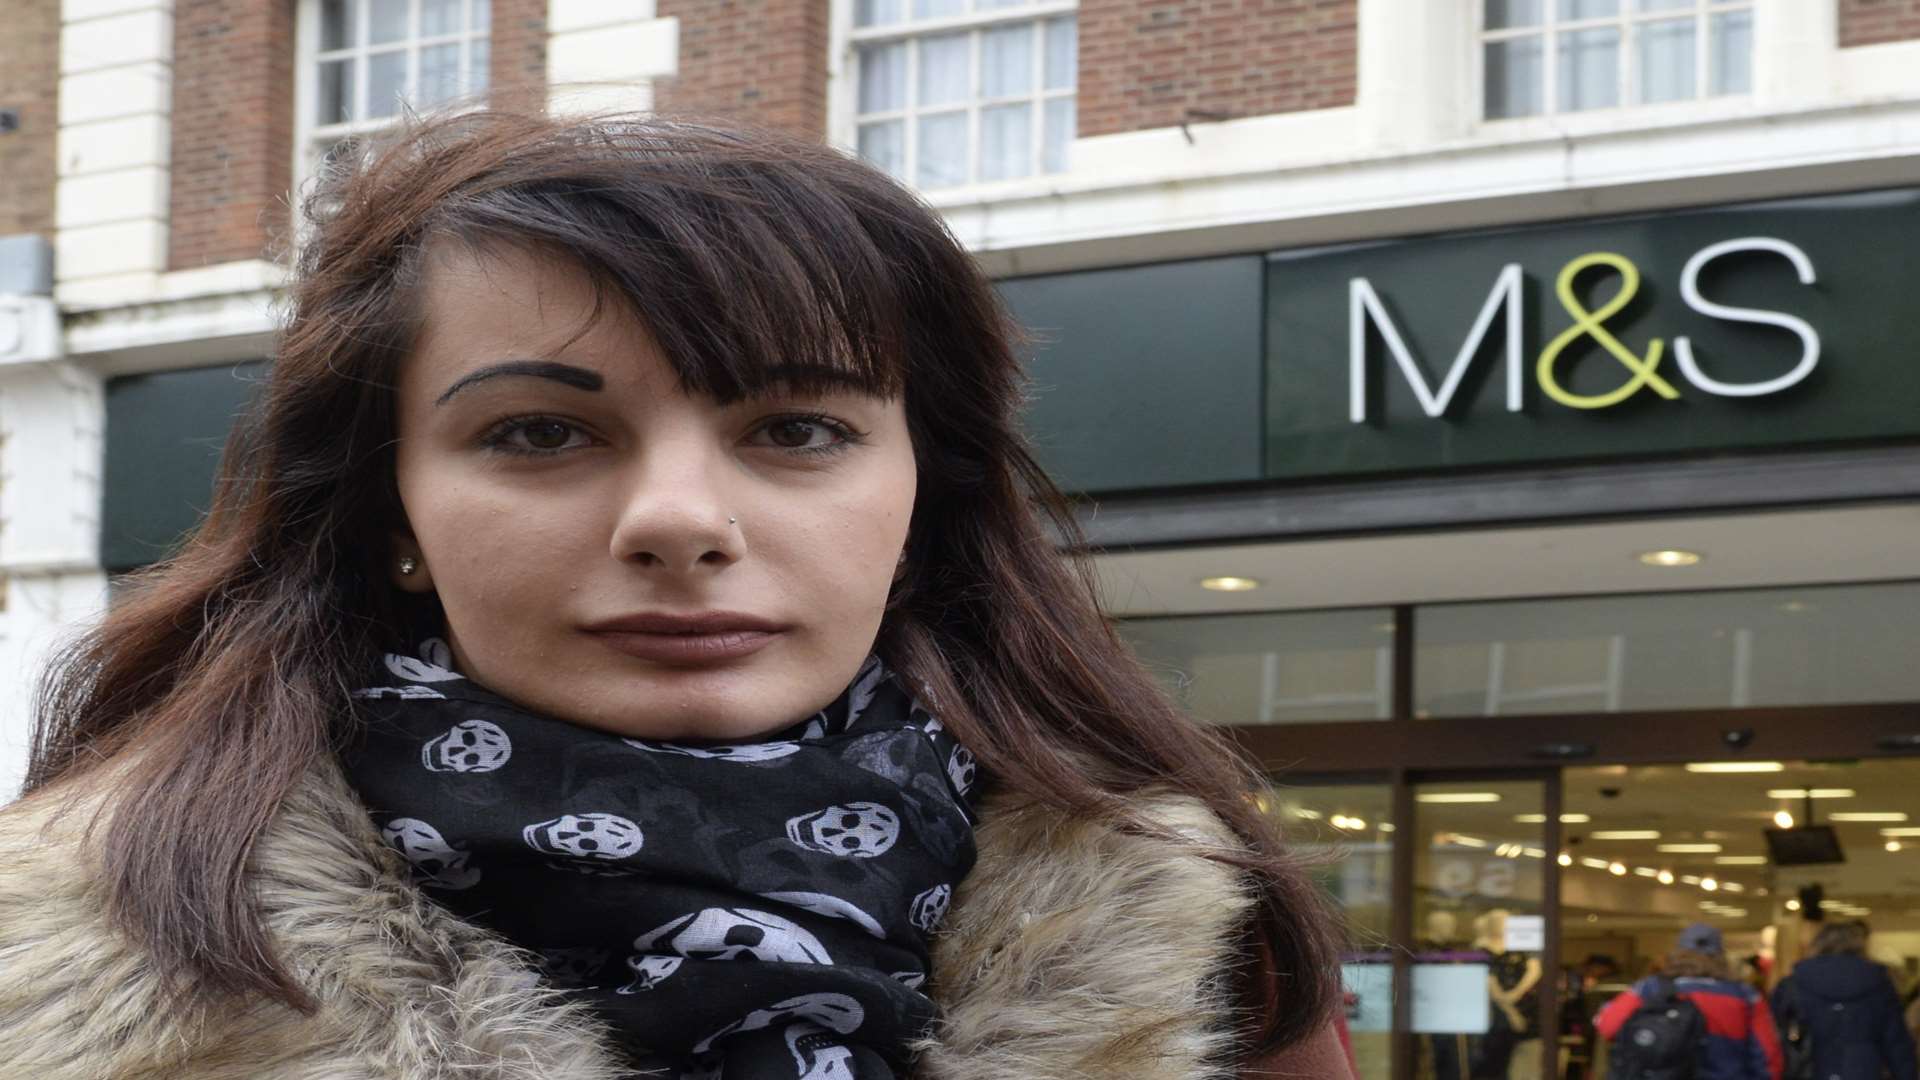 Kelin Tevfik, who claims she was sacked unfairly by M&S